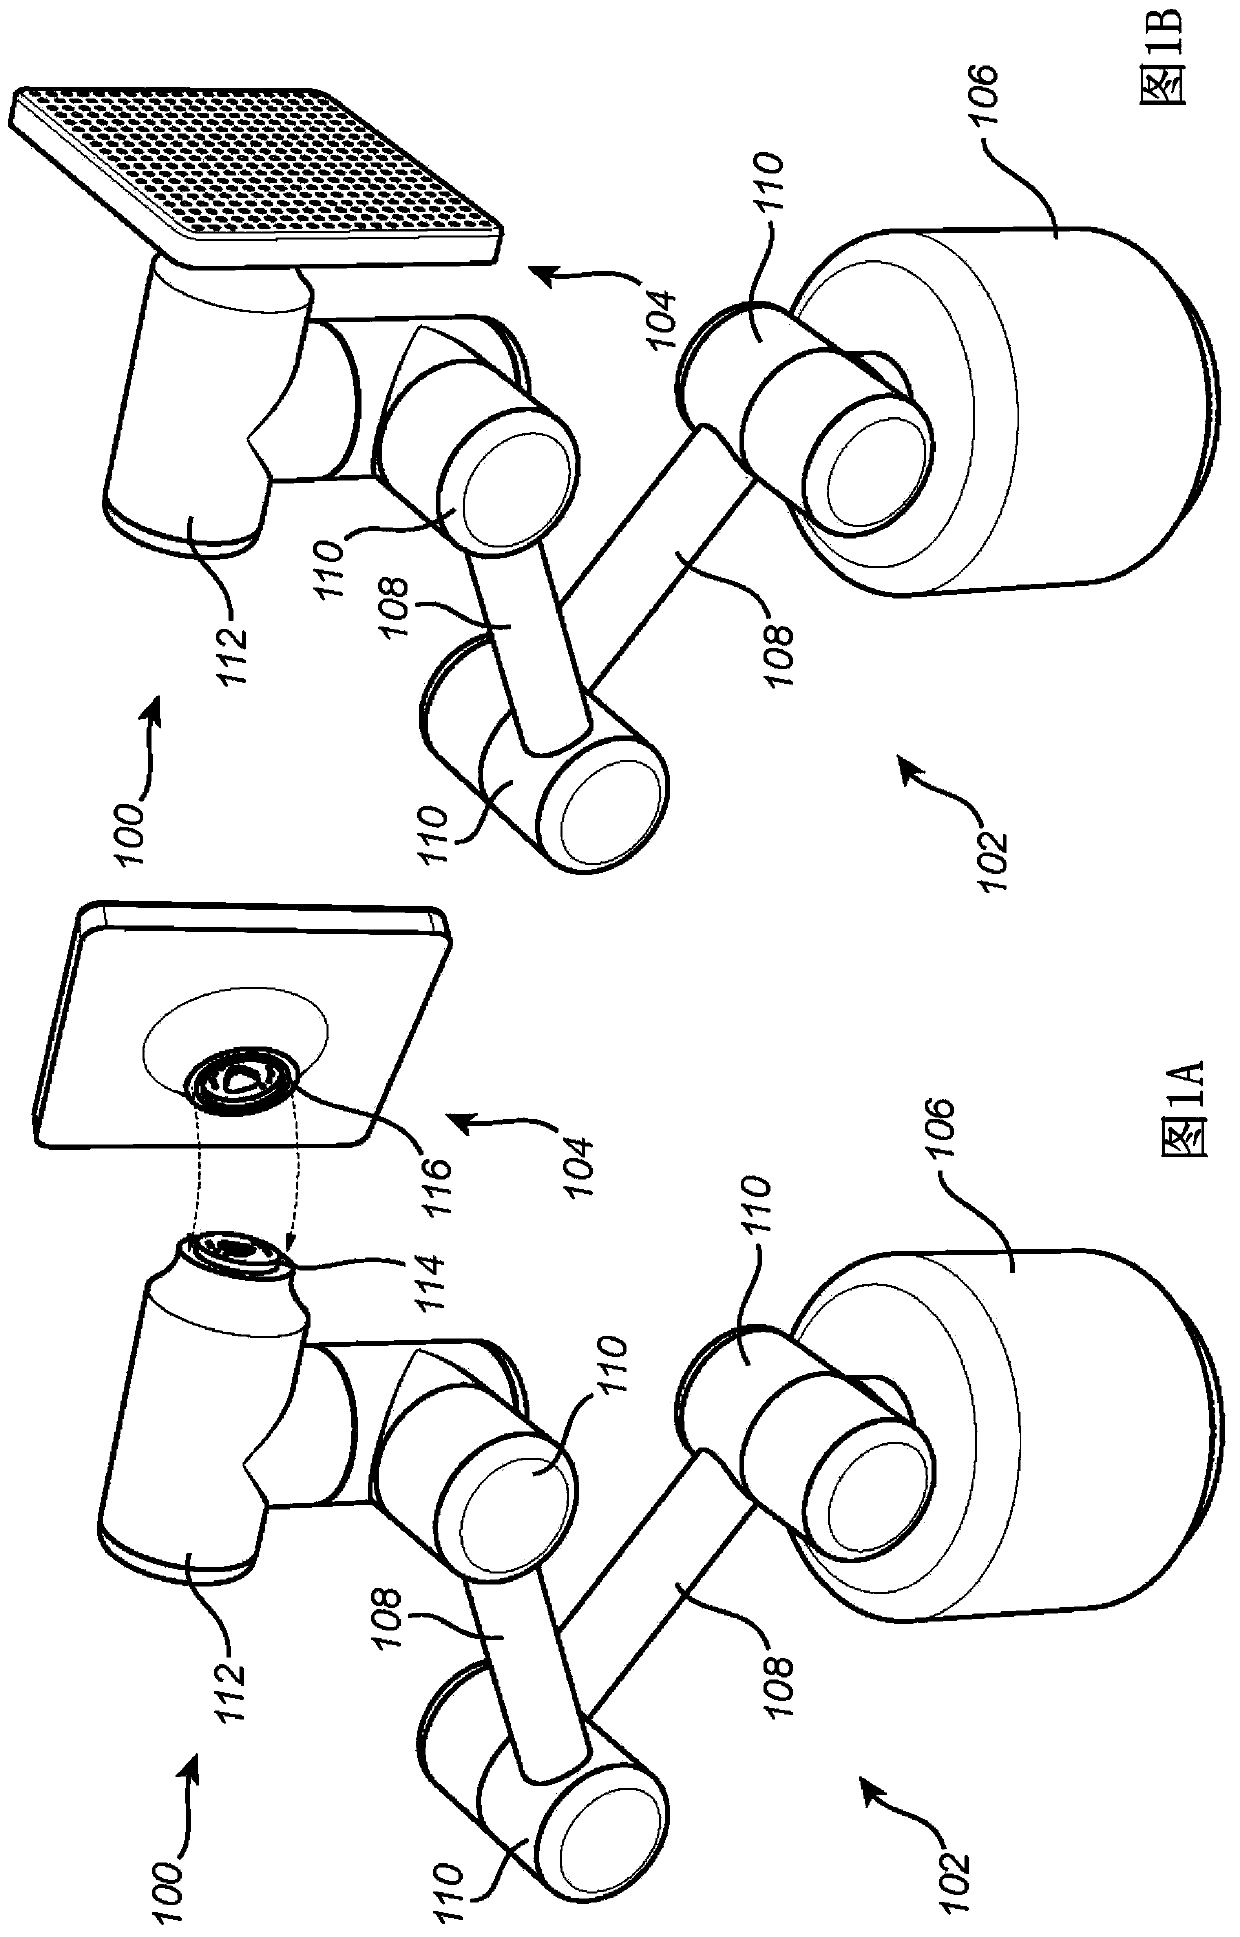 User interactive electronic system and method for controlling a robotic arm